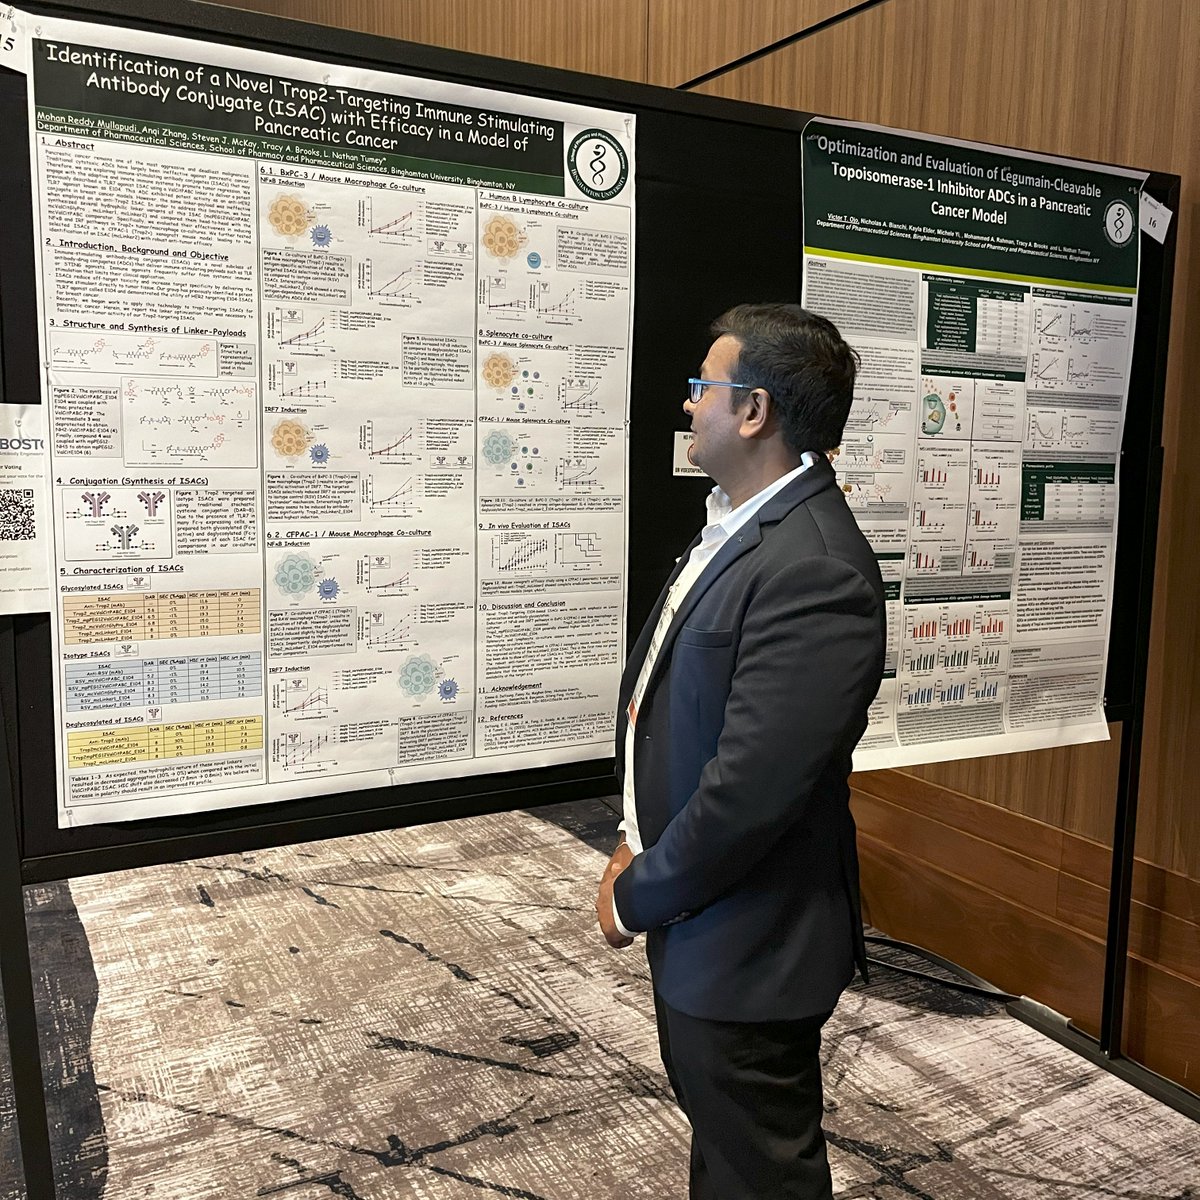 Presenting my research today “Identification of a Novel Trop2-Targeting Immune Stimulating Antibody Conjugate (ISAC) with Efficacy in a Model of Pancreatic Cancer” Poster #C015
@PEGSboston #TumeyGroup #TumeyLab #ADCs #ISACs #CancerImmunotherapy #PEGSummit #PEGSBoston #PEGS2024